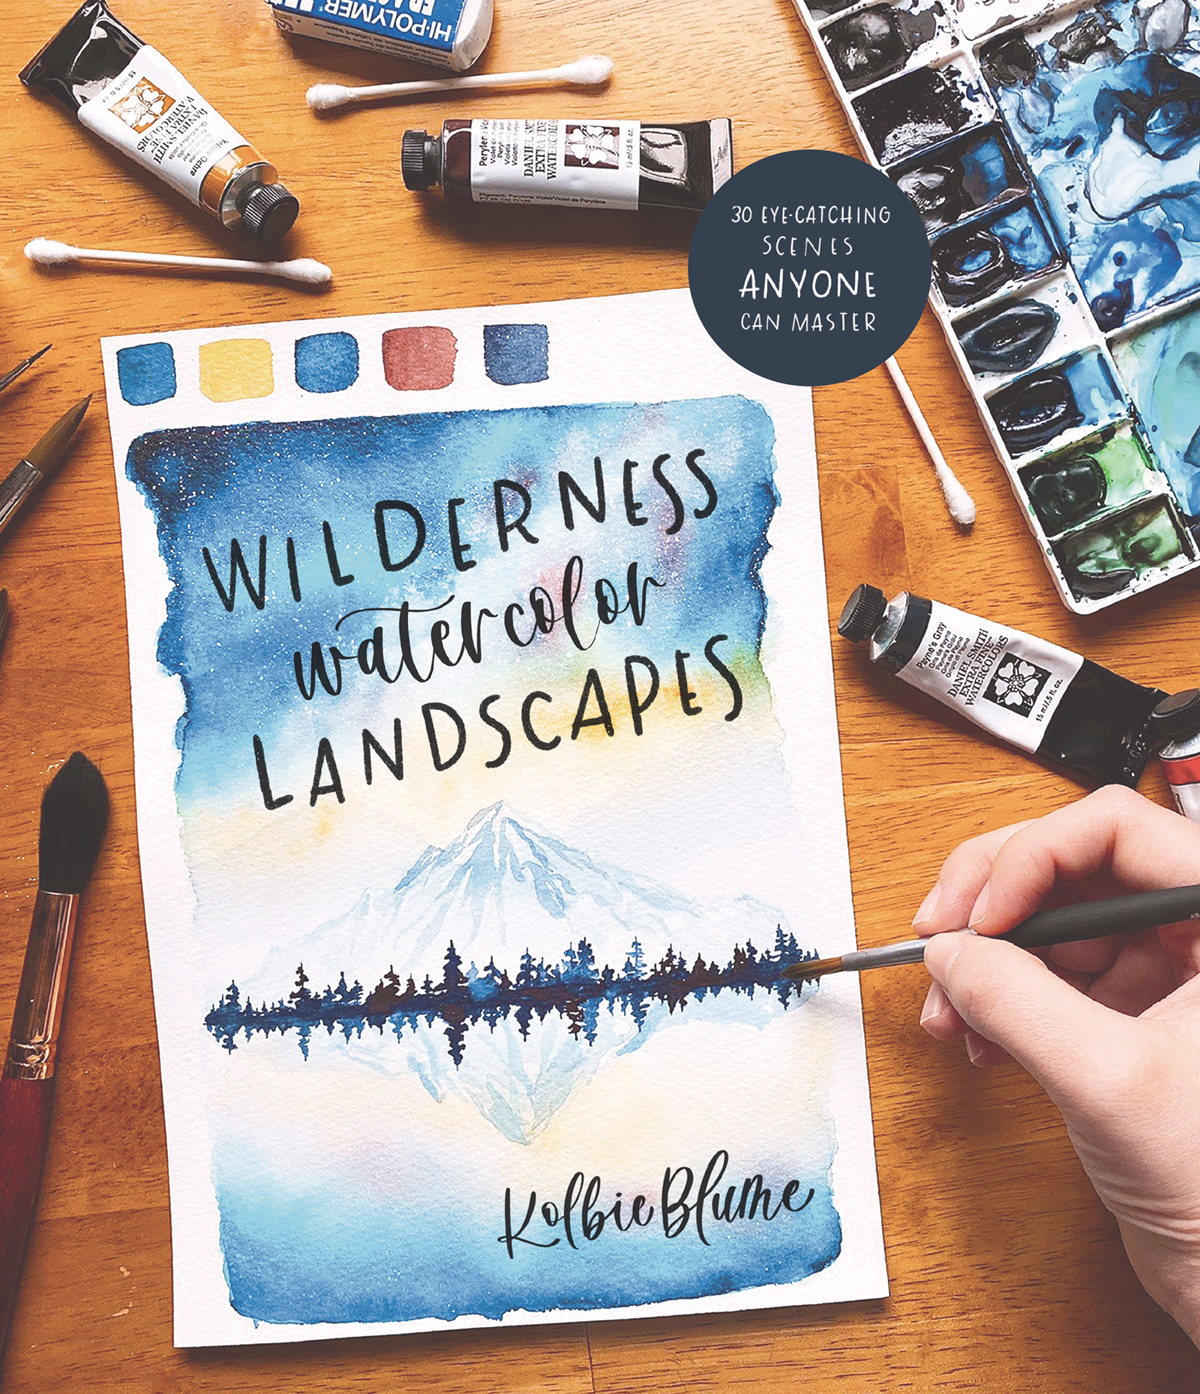 Wilderness Watercolor Landscapes 30 Eye-Catching Scenes Anyone Can Master - image 1